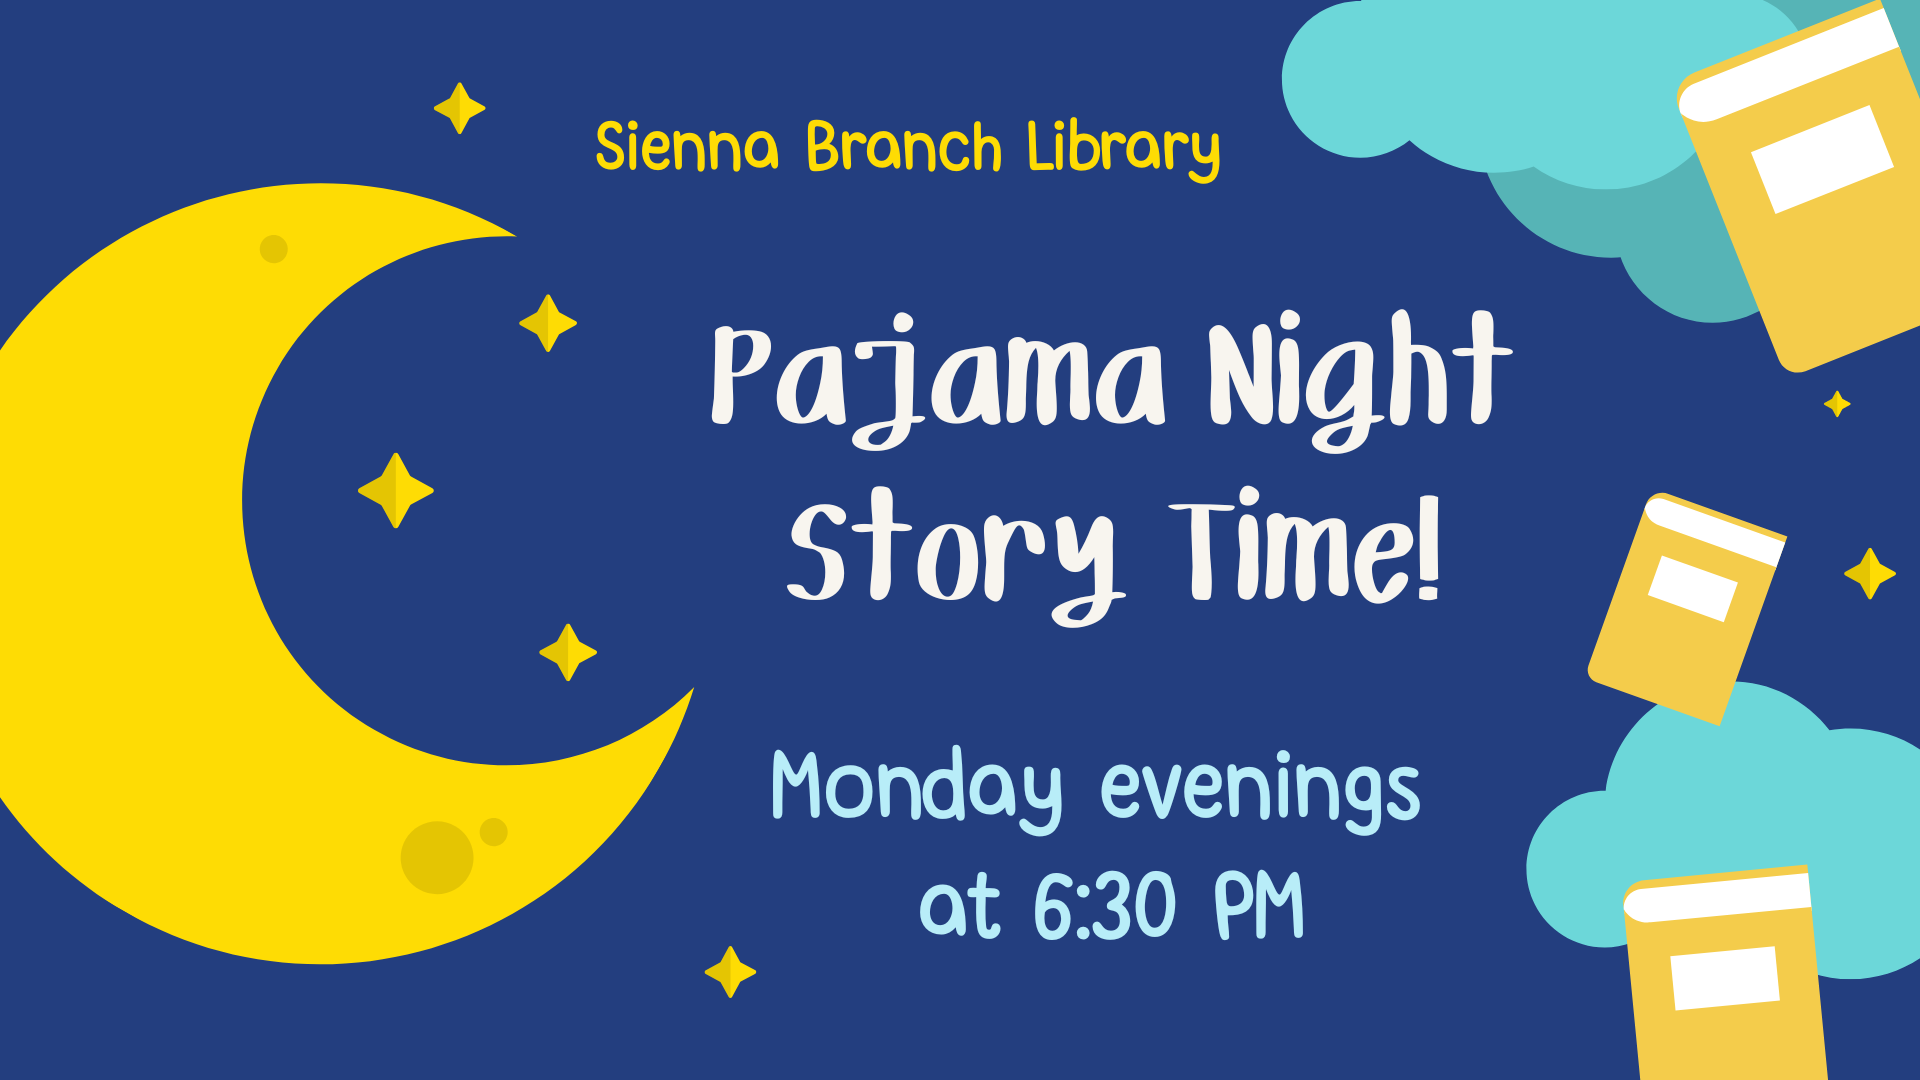 Sienna Branch Library Pajama Night Story Time Monday evenings at 6:30 PM